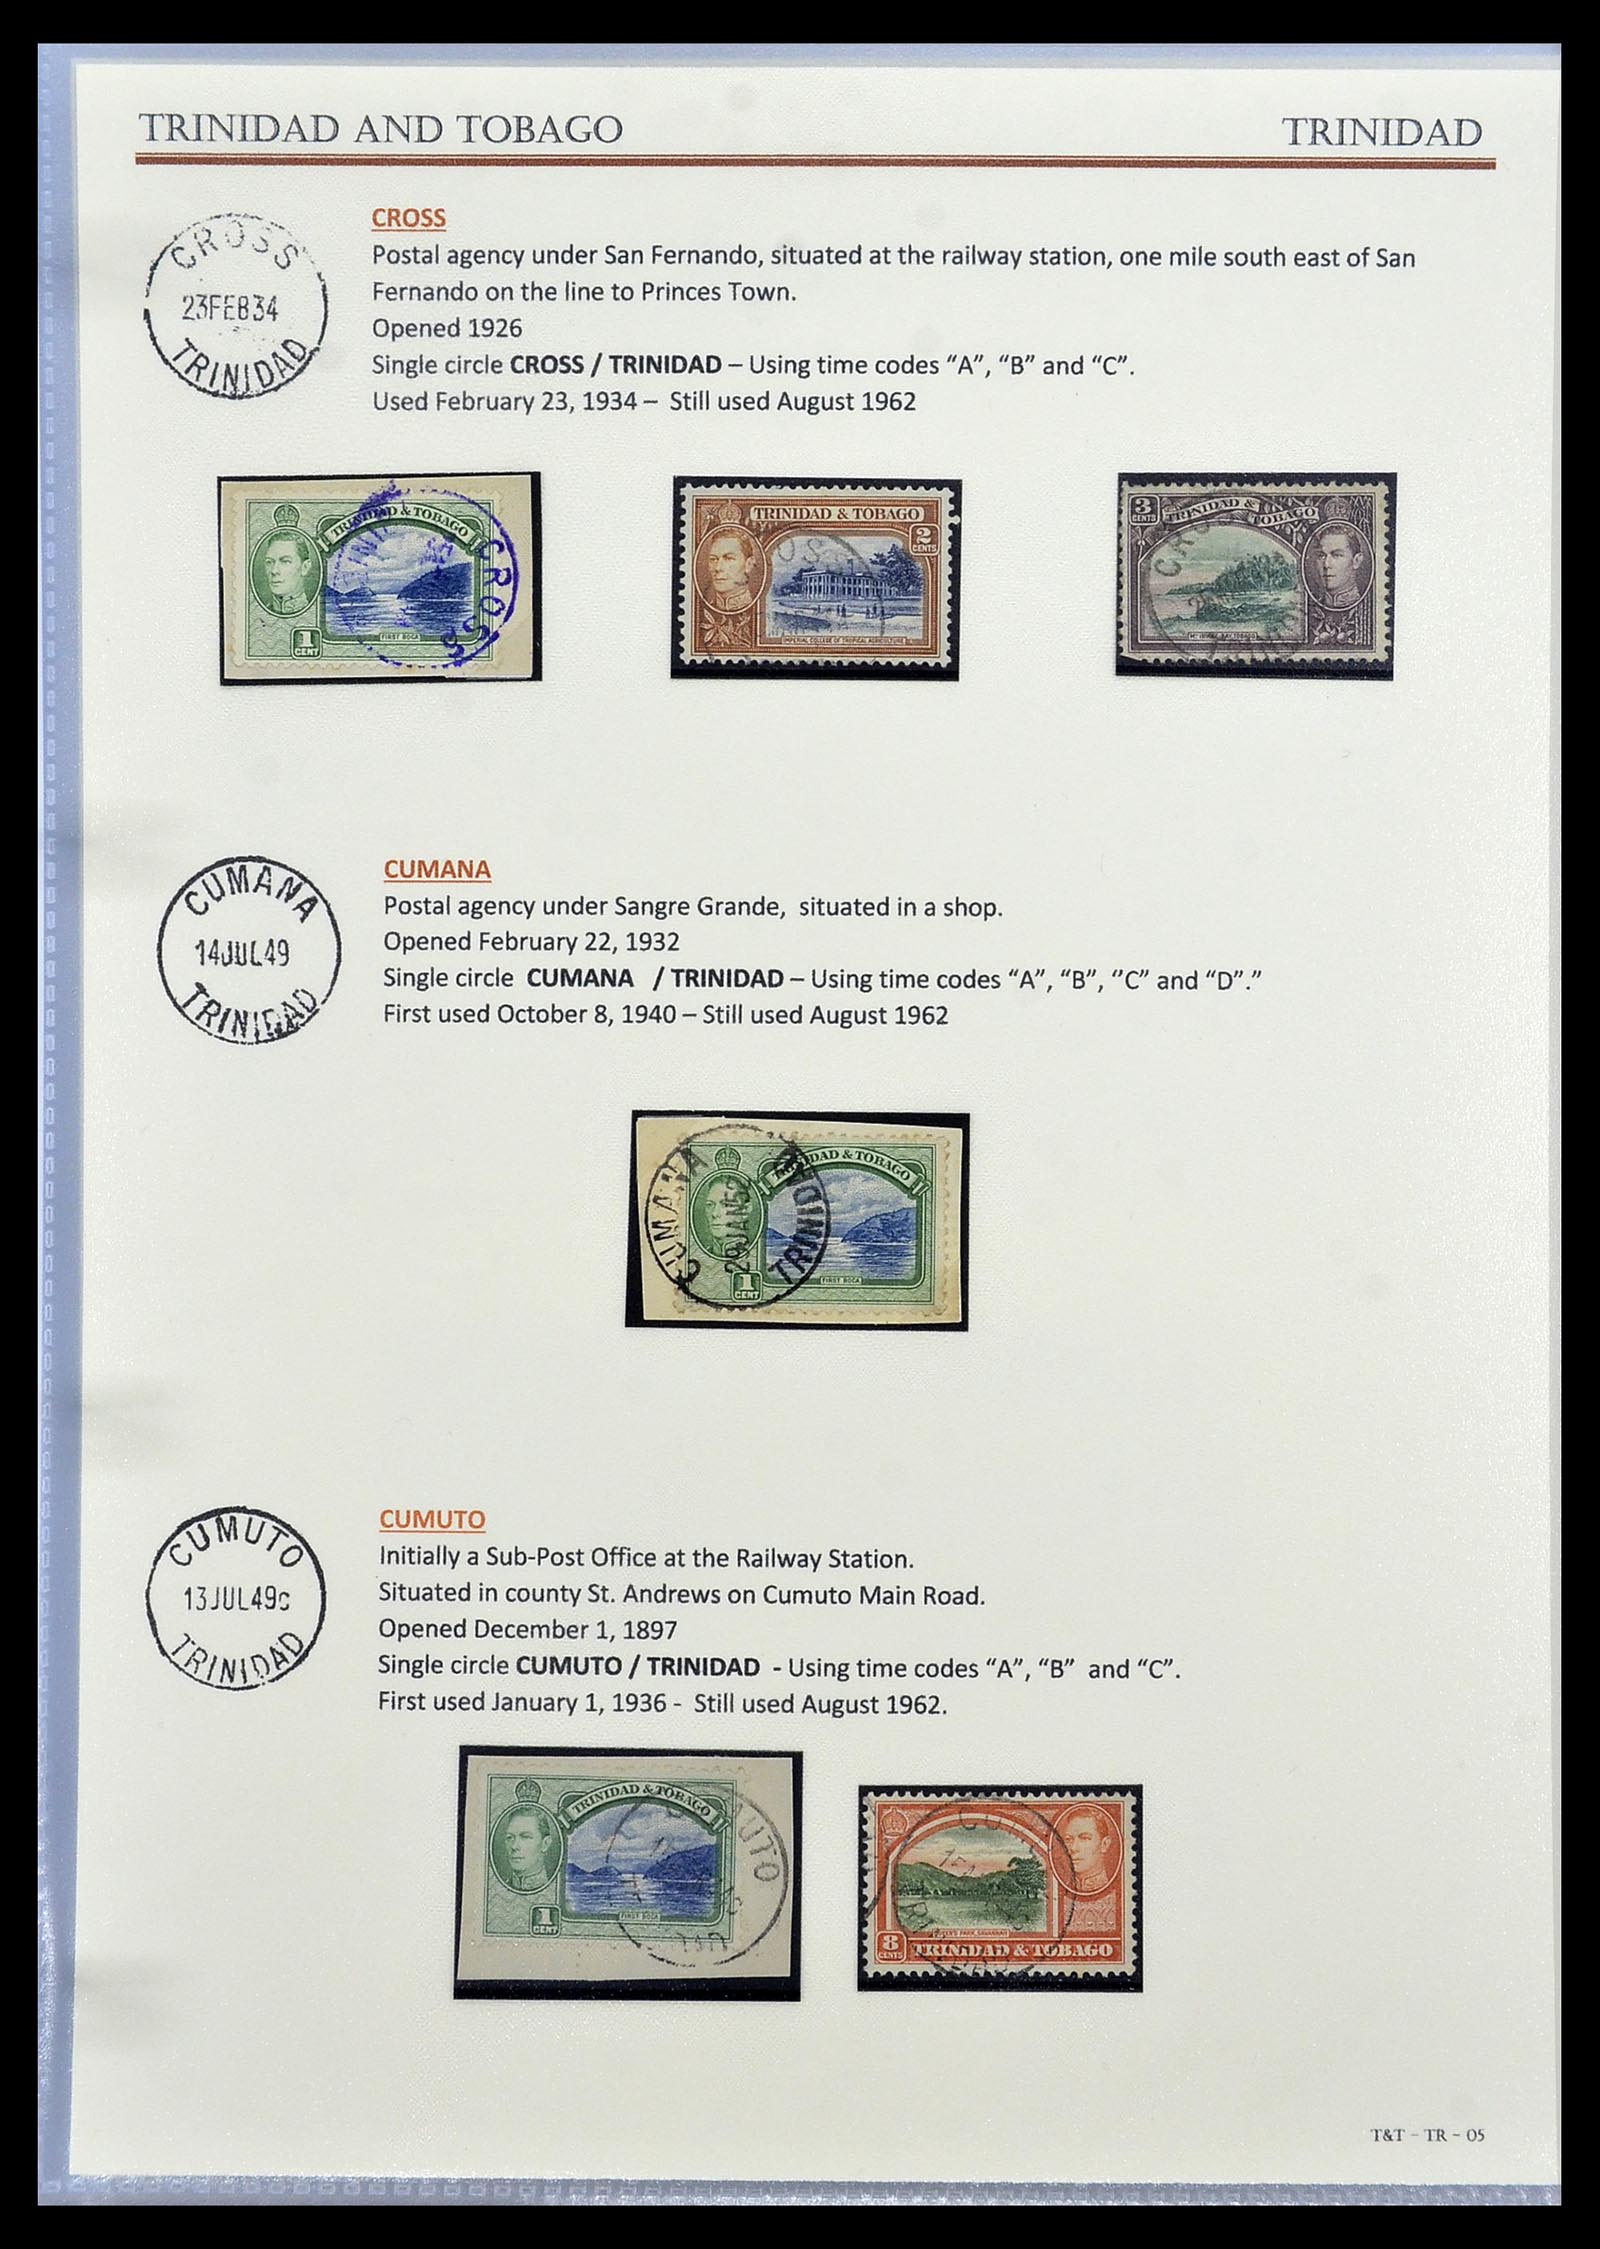 34527 020 - Stamp Collection 34527 Trinidad and Tobago cancels 1900-1956.